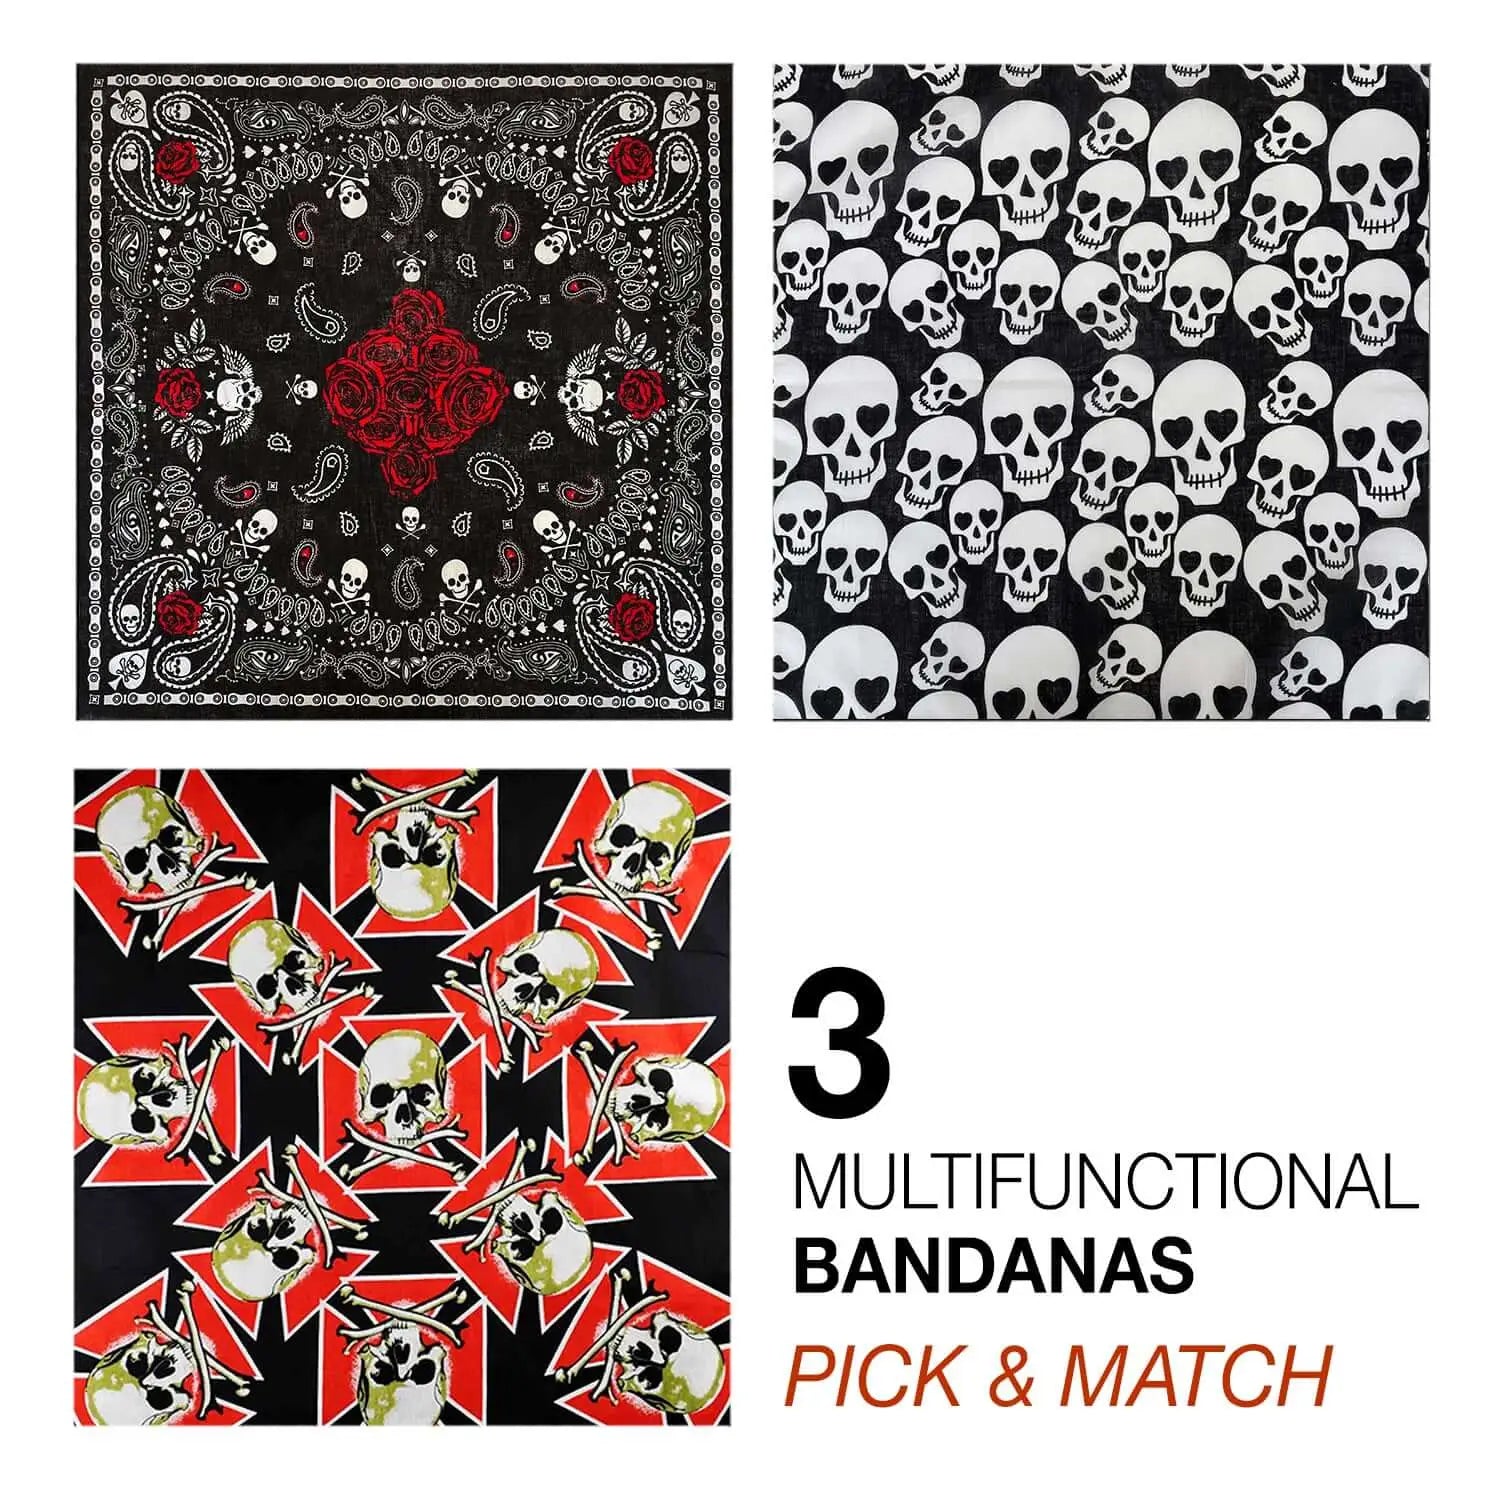 Gothic skull bandana set featuring four unique designs with skulls and roses.